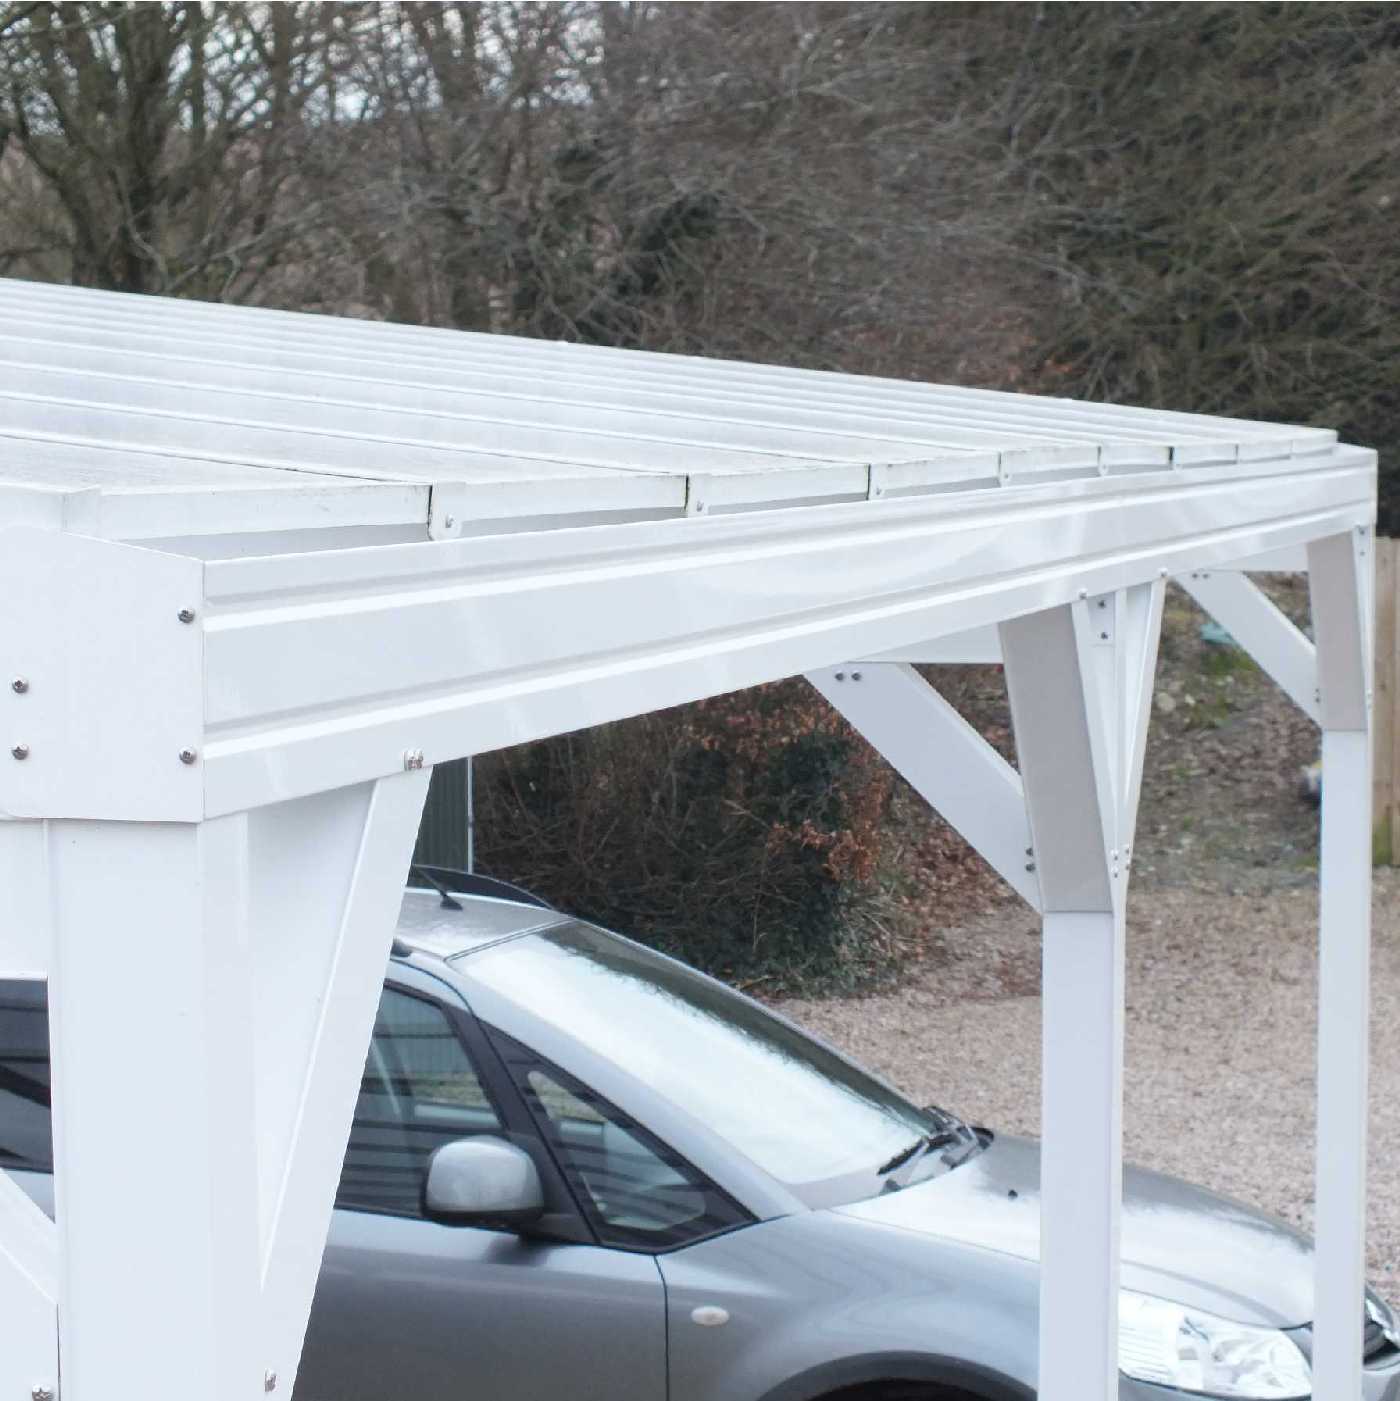 Omega Smart Free-Standing, White MonoPitch Roof Canopy with 6mm Glass Clear Plate Polycarbonate Glazing - 7.0m (W) x 2.5m (P), (8) Supporting Posts from Omega Build